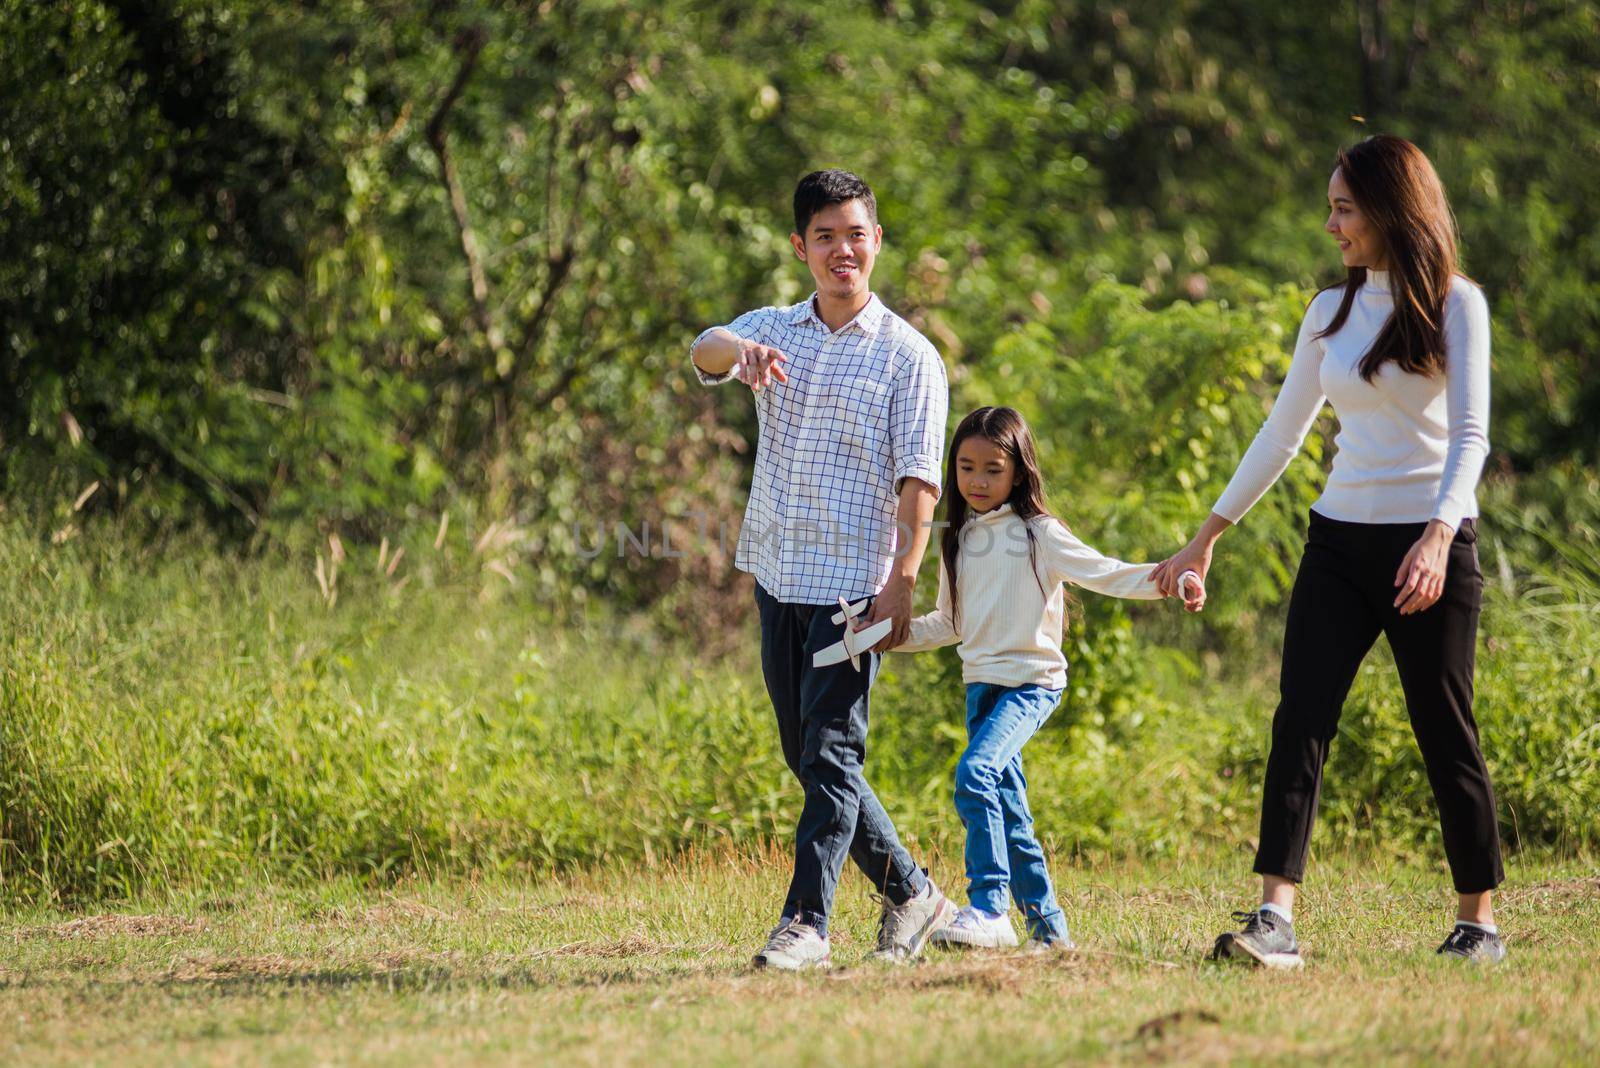 Asian family having fun and enjoying outdoor walking down the road outside together in the park by Sorapop